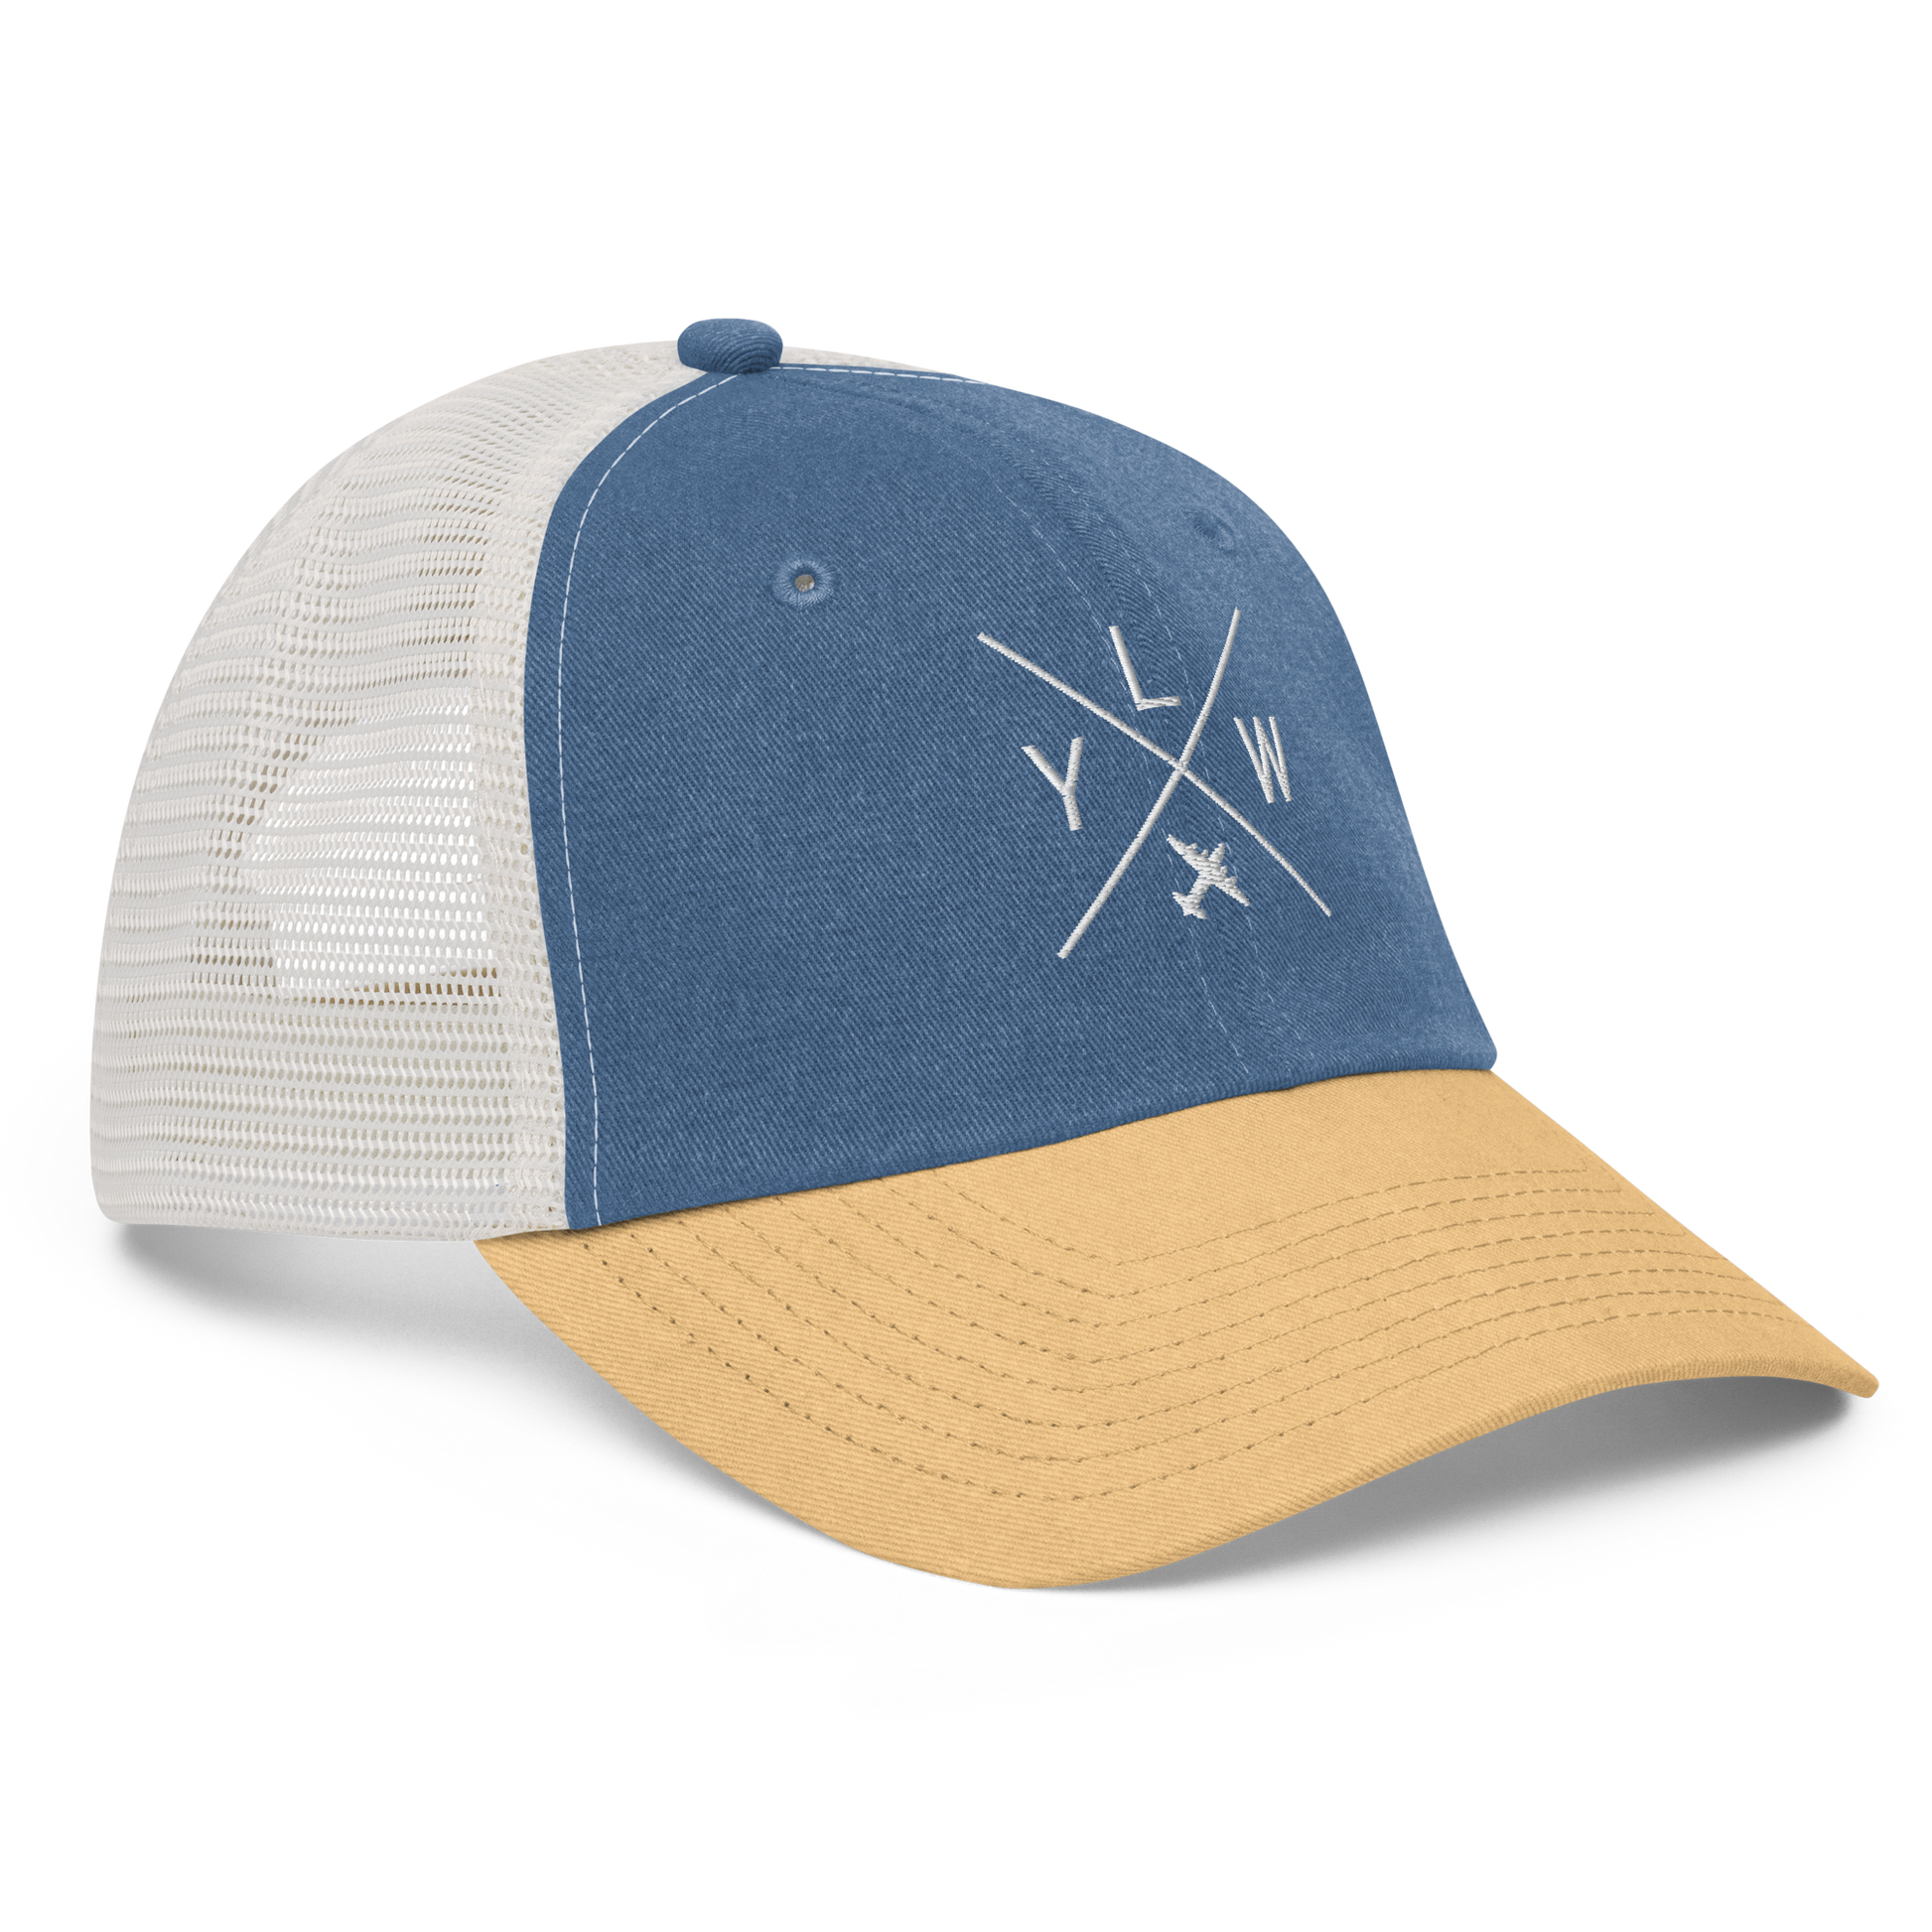 YHM Designs - YLW Kelowna Pigment-Dyed Trucker Cap - Crossed-X Design with Airport Code and Vintage Propliner - White Embroidery - Image 18